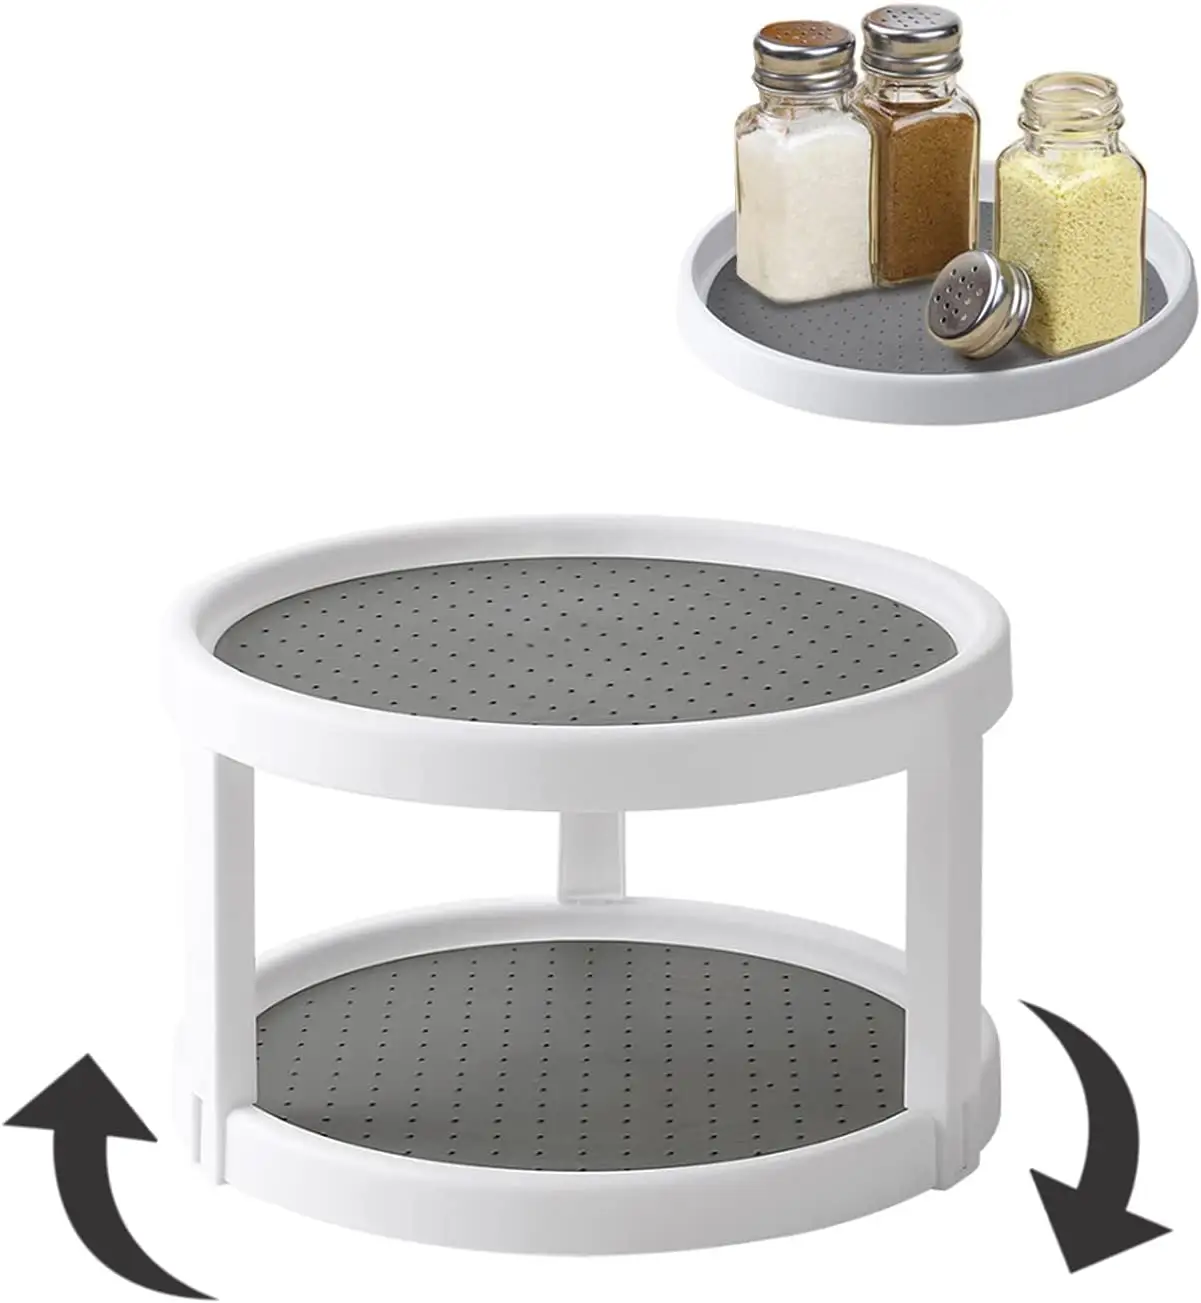 1/2 Tier Plastic Non-Skid Pantry Cabinet Lazy Susan Kitchen Organizer 360 degree Turntable Rotating Spice Rack